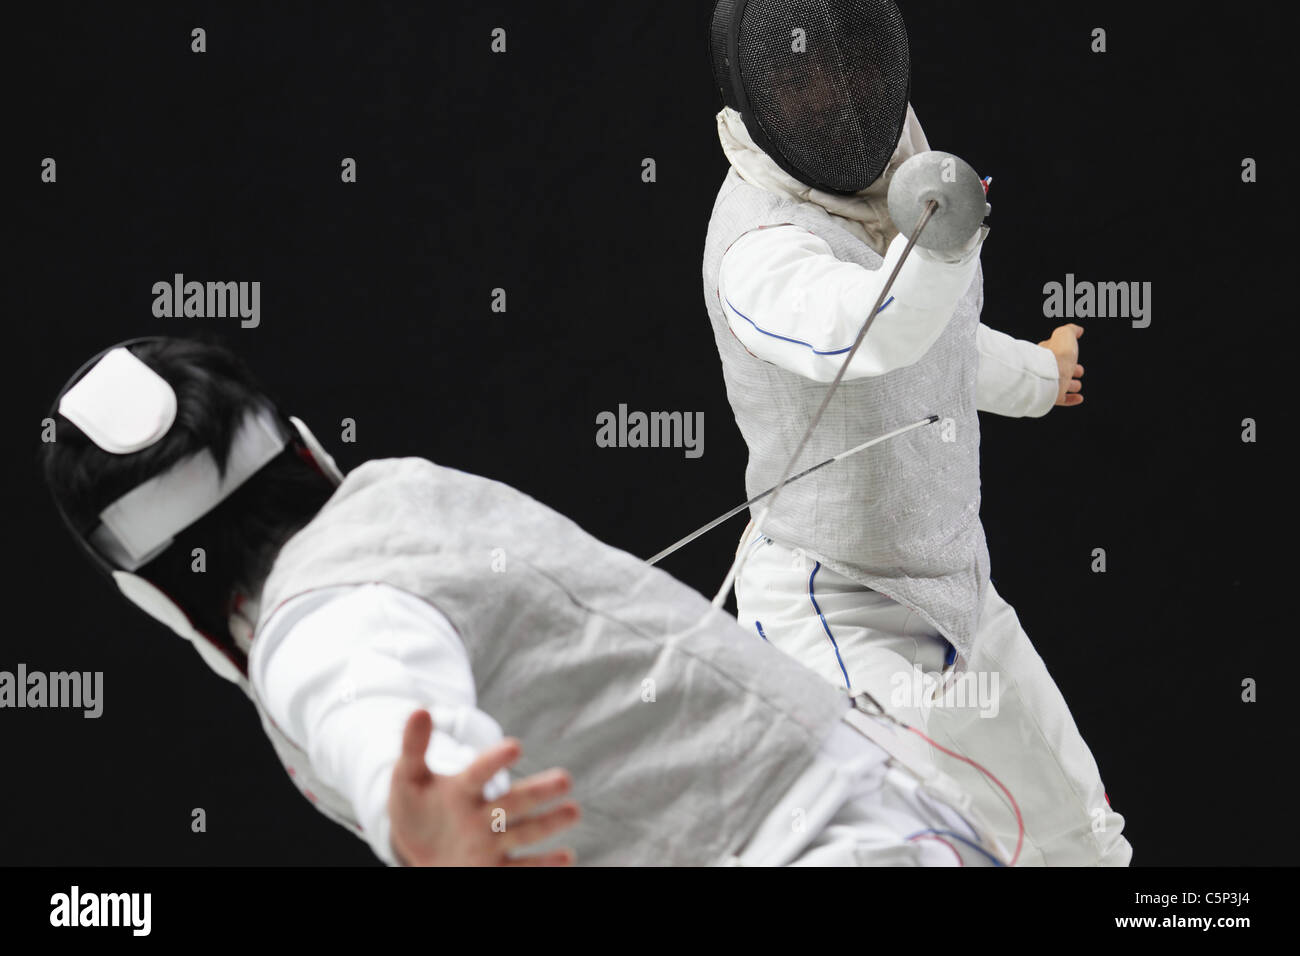 Fencing Stock Photo